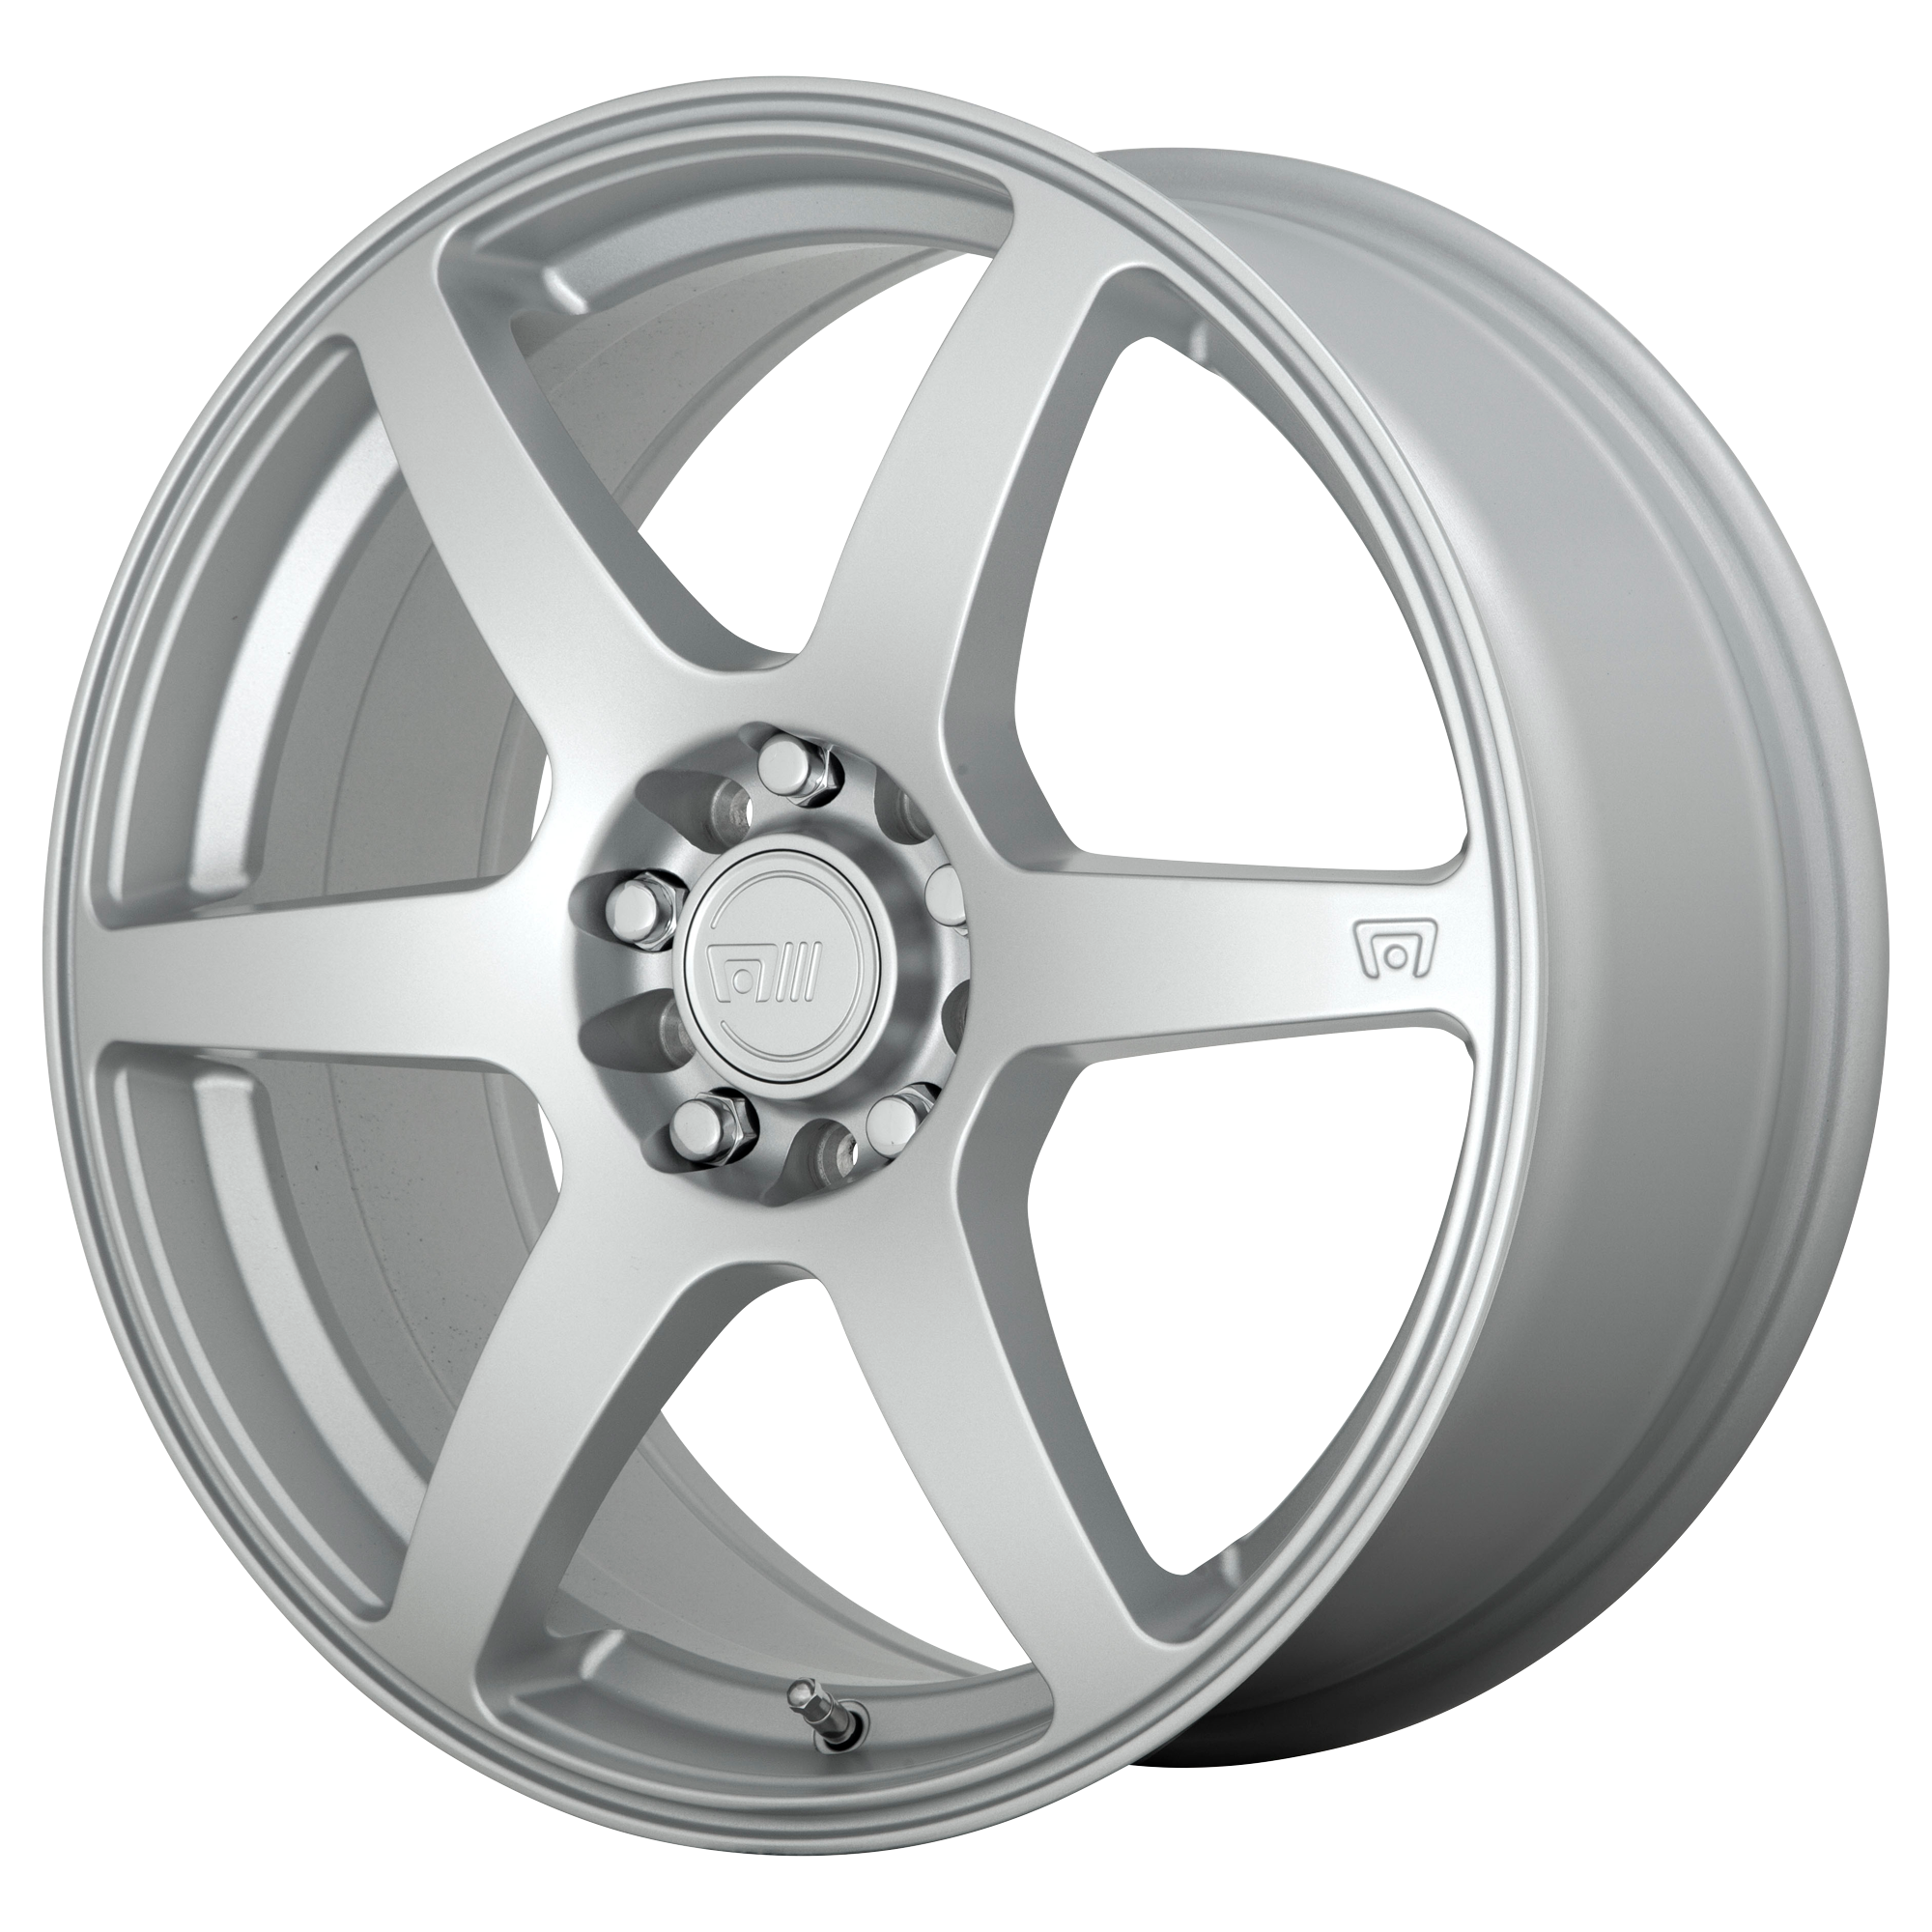 CS6 15x6.5 5x100.00/5x114.30 HYPER SILVER (40 mm) - Tires and Engine Performance